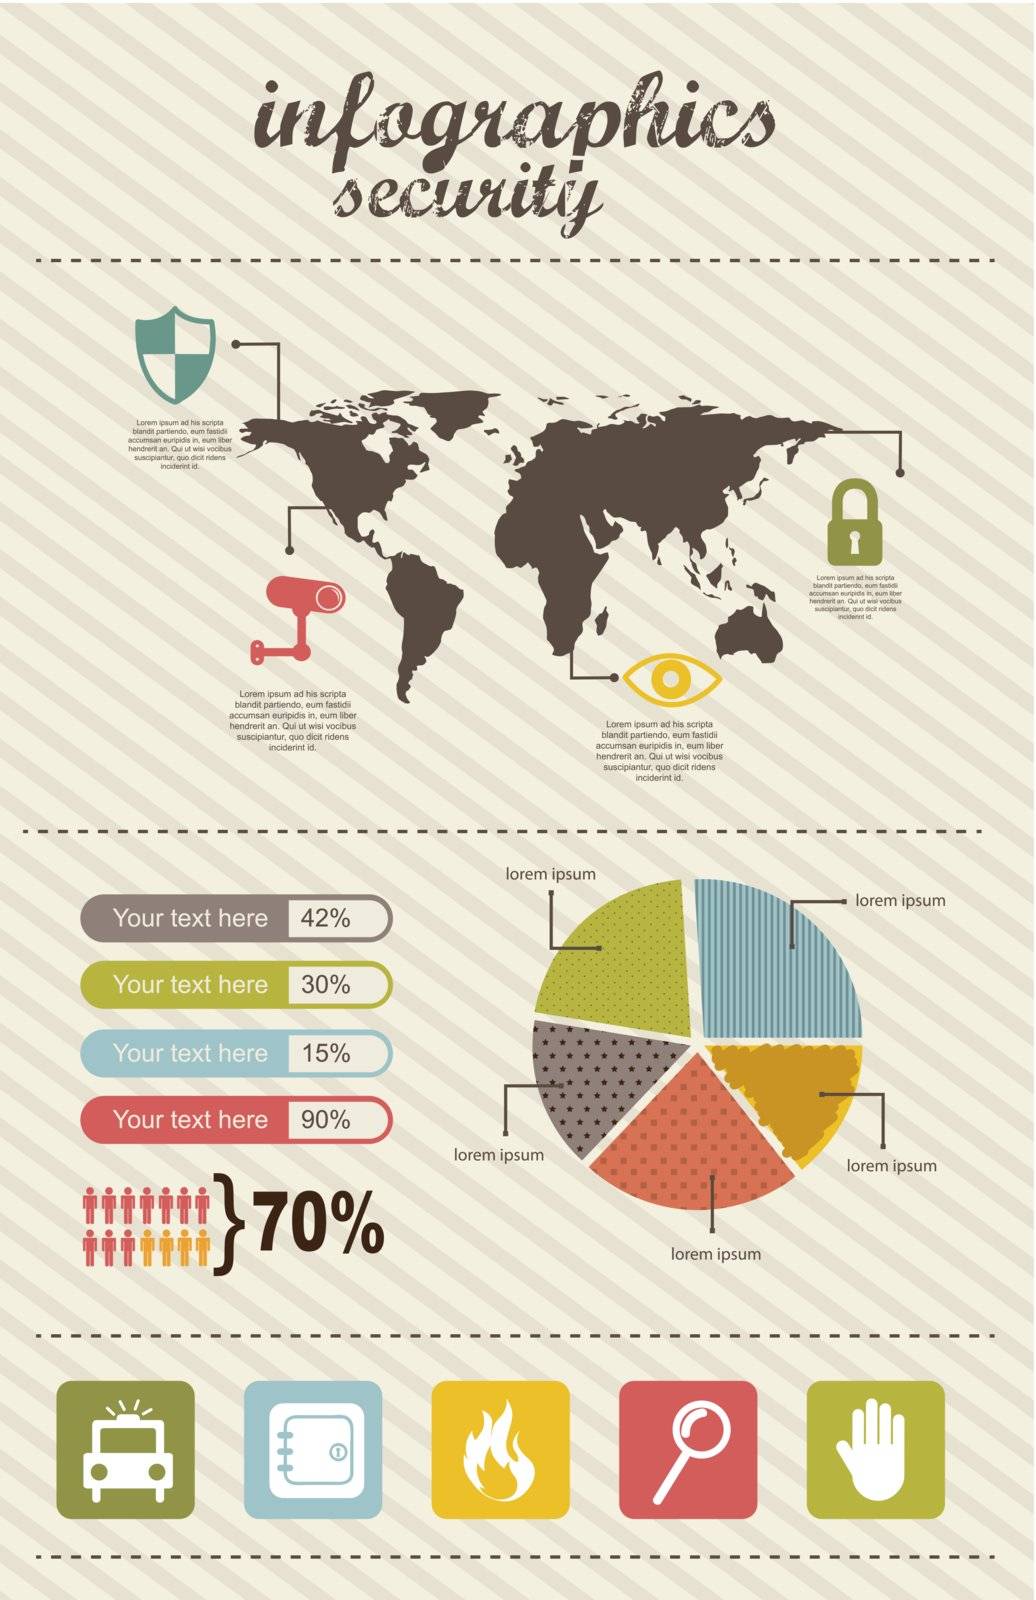 infographics of security, vintage style. vector illustration